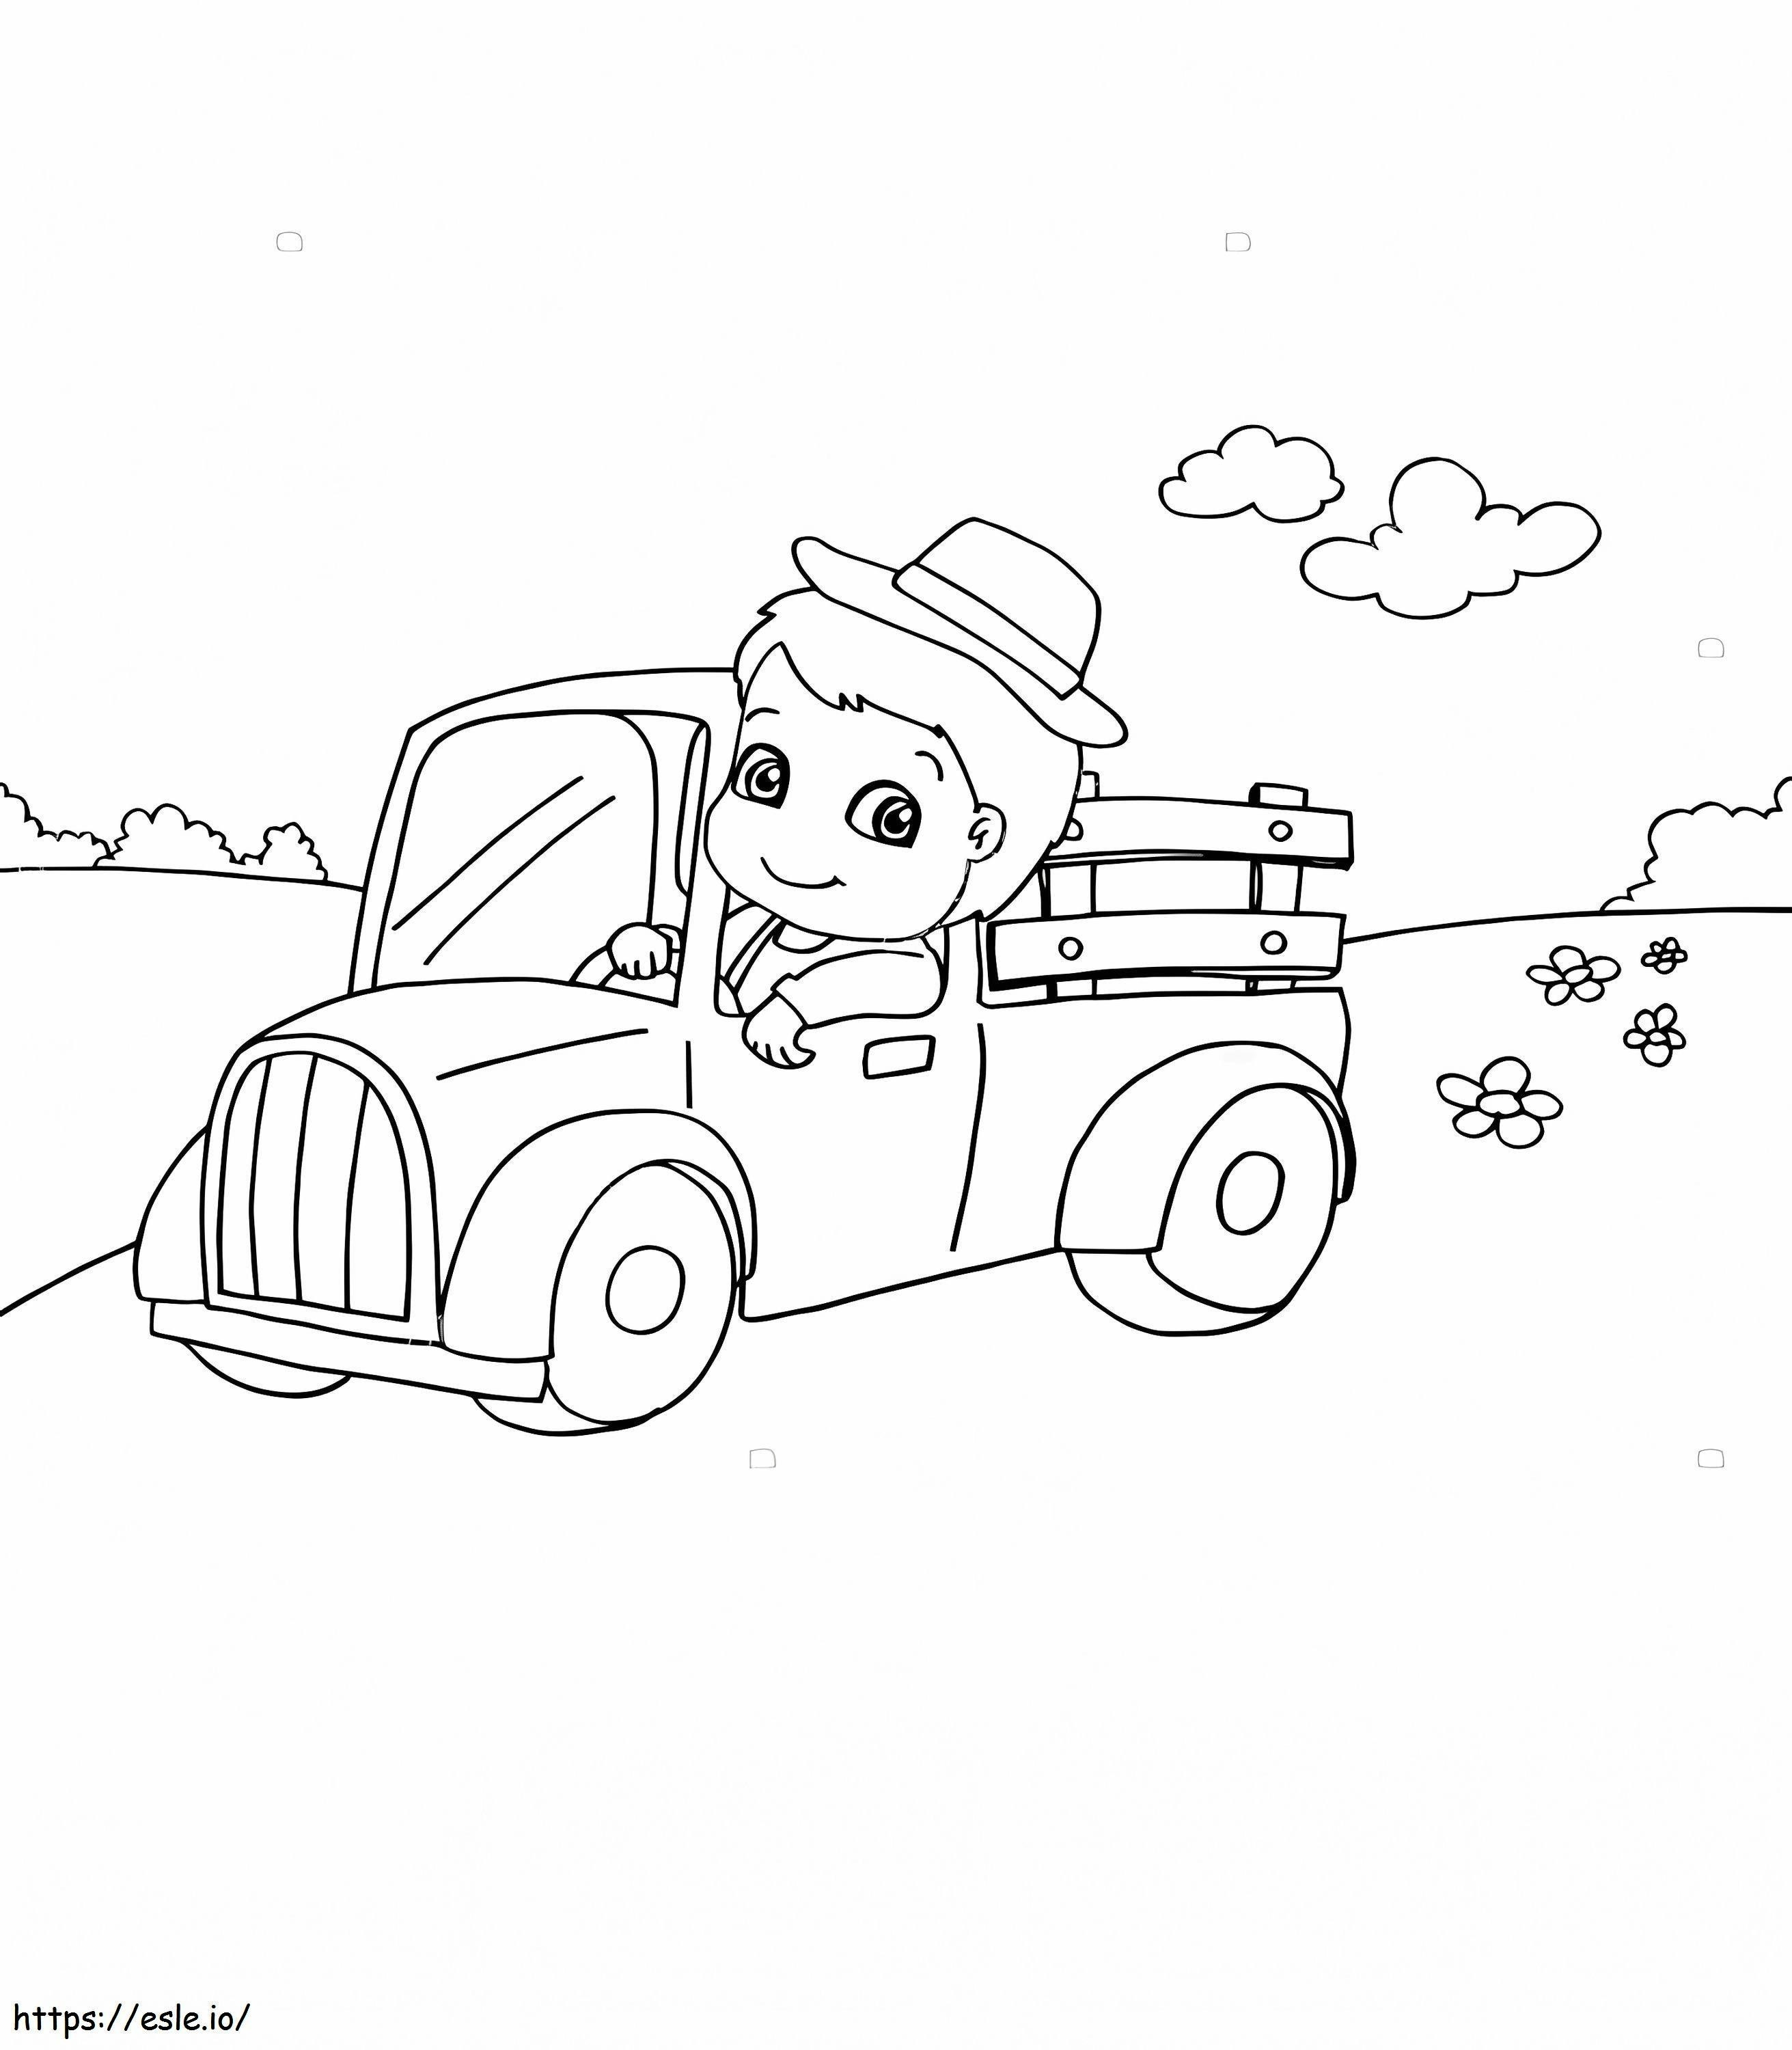 Depositphotos_158663600 Stock Illustration 01 Little Boy Driving A coloring page